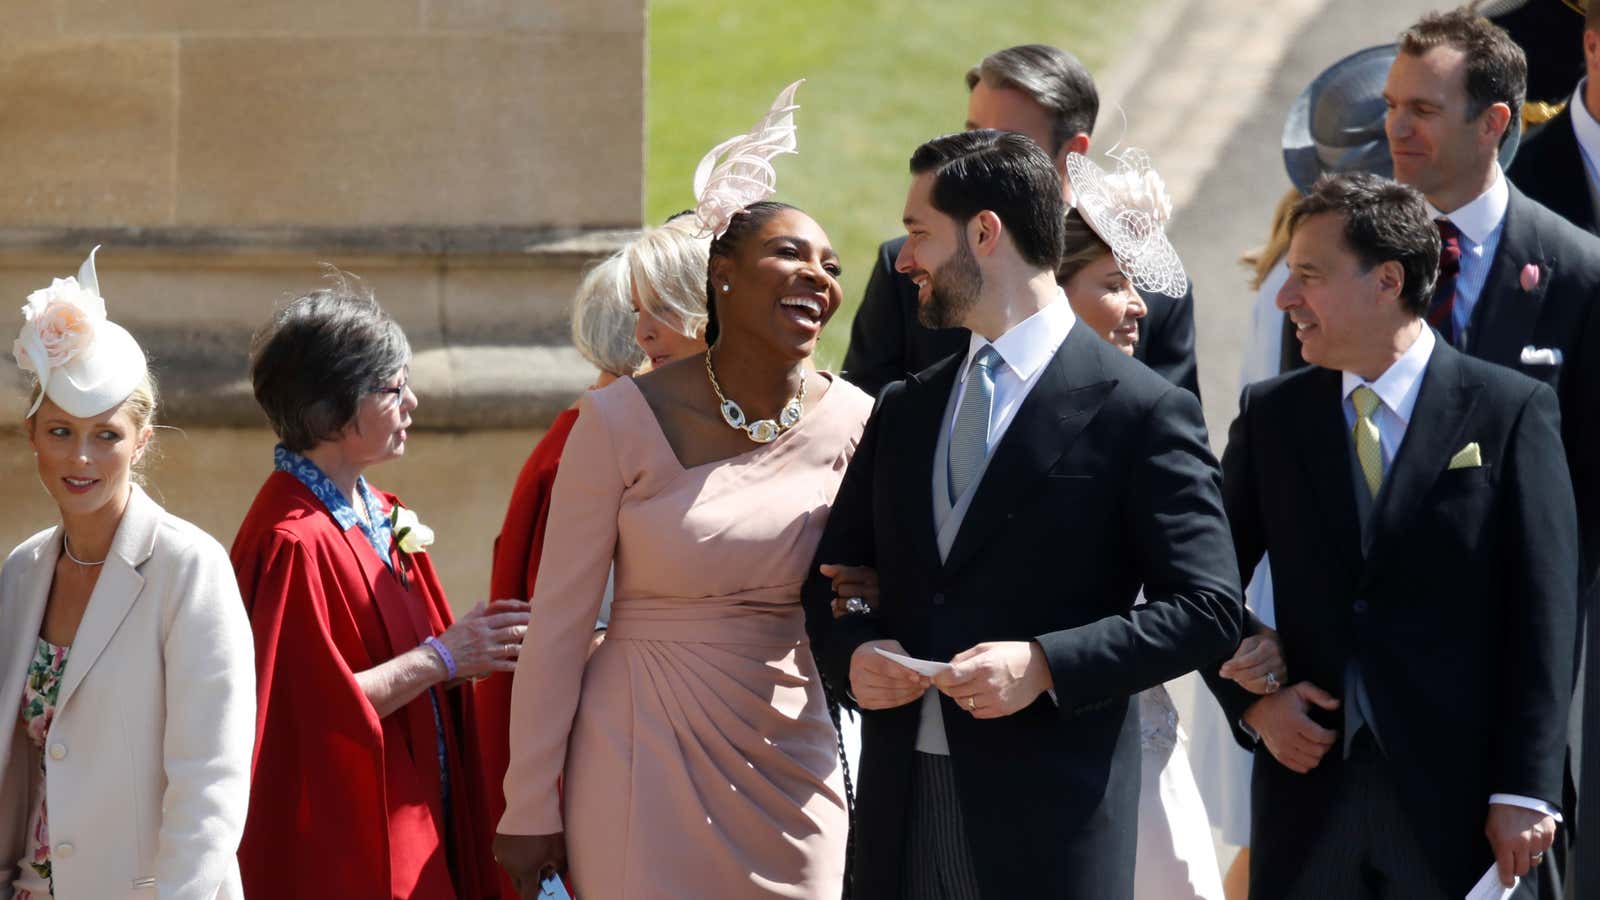 Serena Williams and Alexis Ohanian Wedding 👰🏾🤵🏻 | Venus and serena  williams, Serena williams wedding, Serena williams